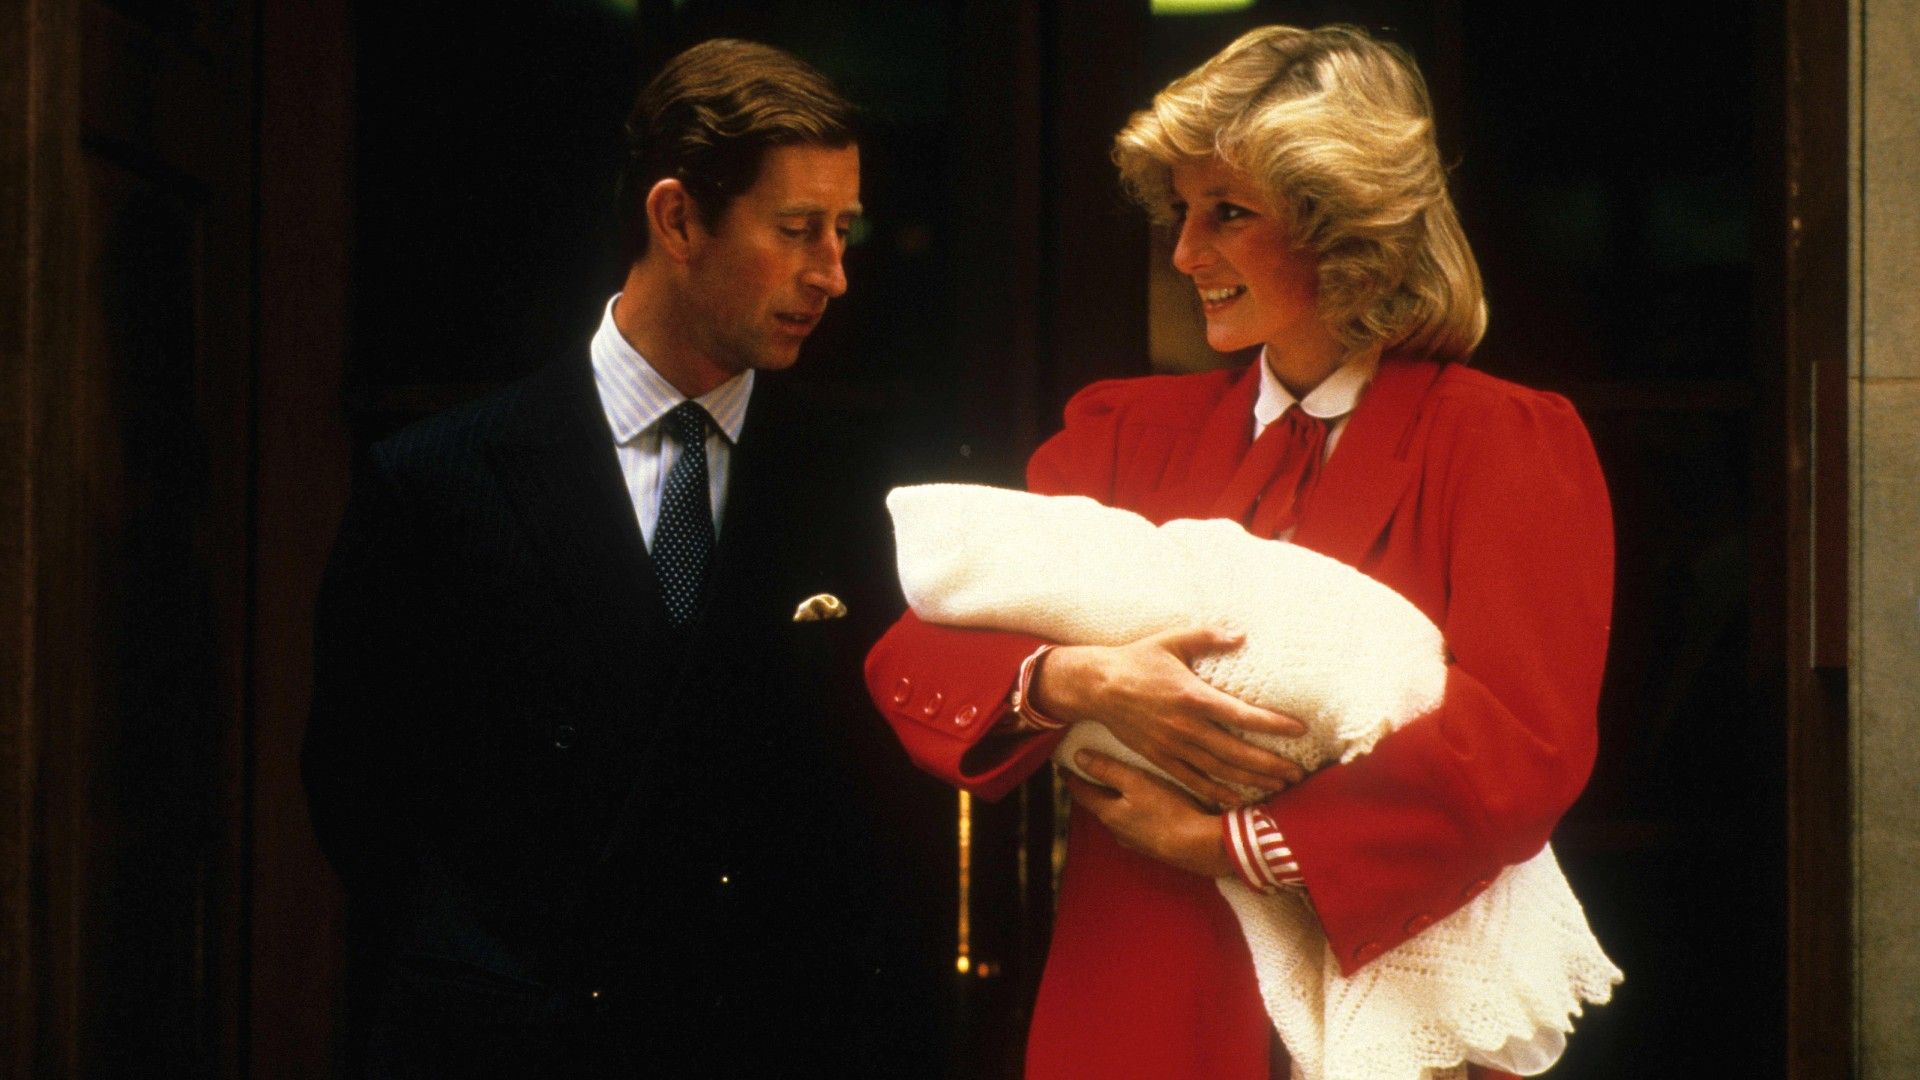 <p>                     In the 1992 book by Andrew Morton, <em>Diana: Her True Story</em>, the Princess revealed to the royal biographer that she and Charles were perhaps at their closest when she was pregnant with Prince Harry.                   </p>                                      <p>                     Though she and Andrew denied her involvement in the book at the time, following her death, Morton confirmed that she did indeed contribute to it. At the time, she is quoted as having said, "Between William and Harry being born it is total darkness. I can't remember much, I've blotted it out, it was such pain.                   </p>                                      <p>                     "However, Harry appeared by a miracle. We [Charles and Diana] were very, very close to each other the six weeks before Harry was born, the closest we've ever, ever been and ever will be."                   </p>                                      <p>                     Sadly, she explained that this didn't last long. "Then suddenly as Harry was born it just went bang, our marriage, the whole thing went down the drain."                   </p>